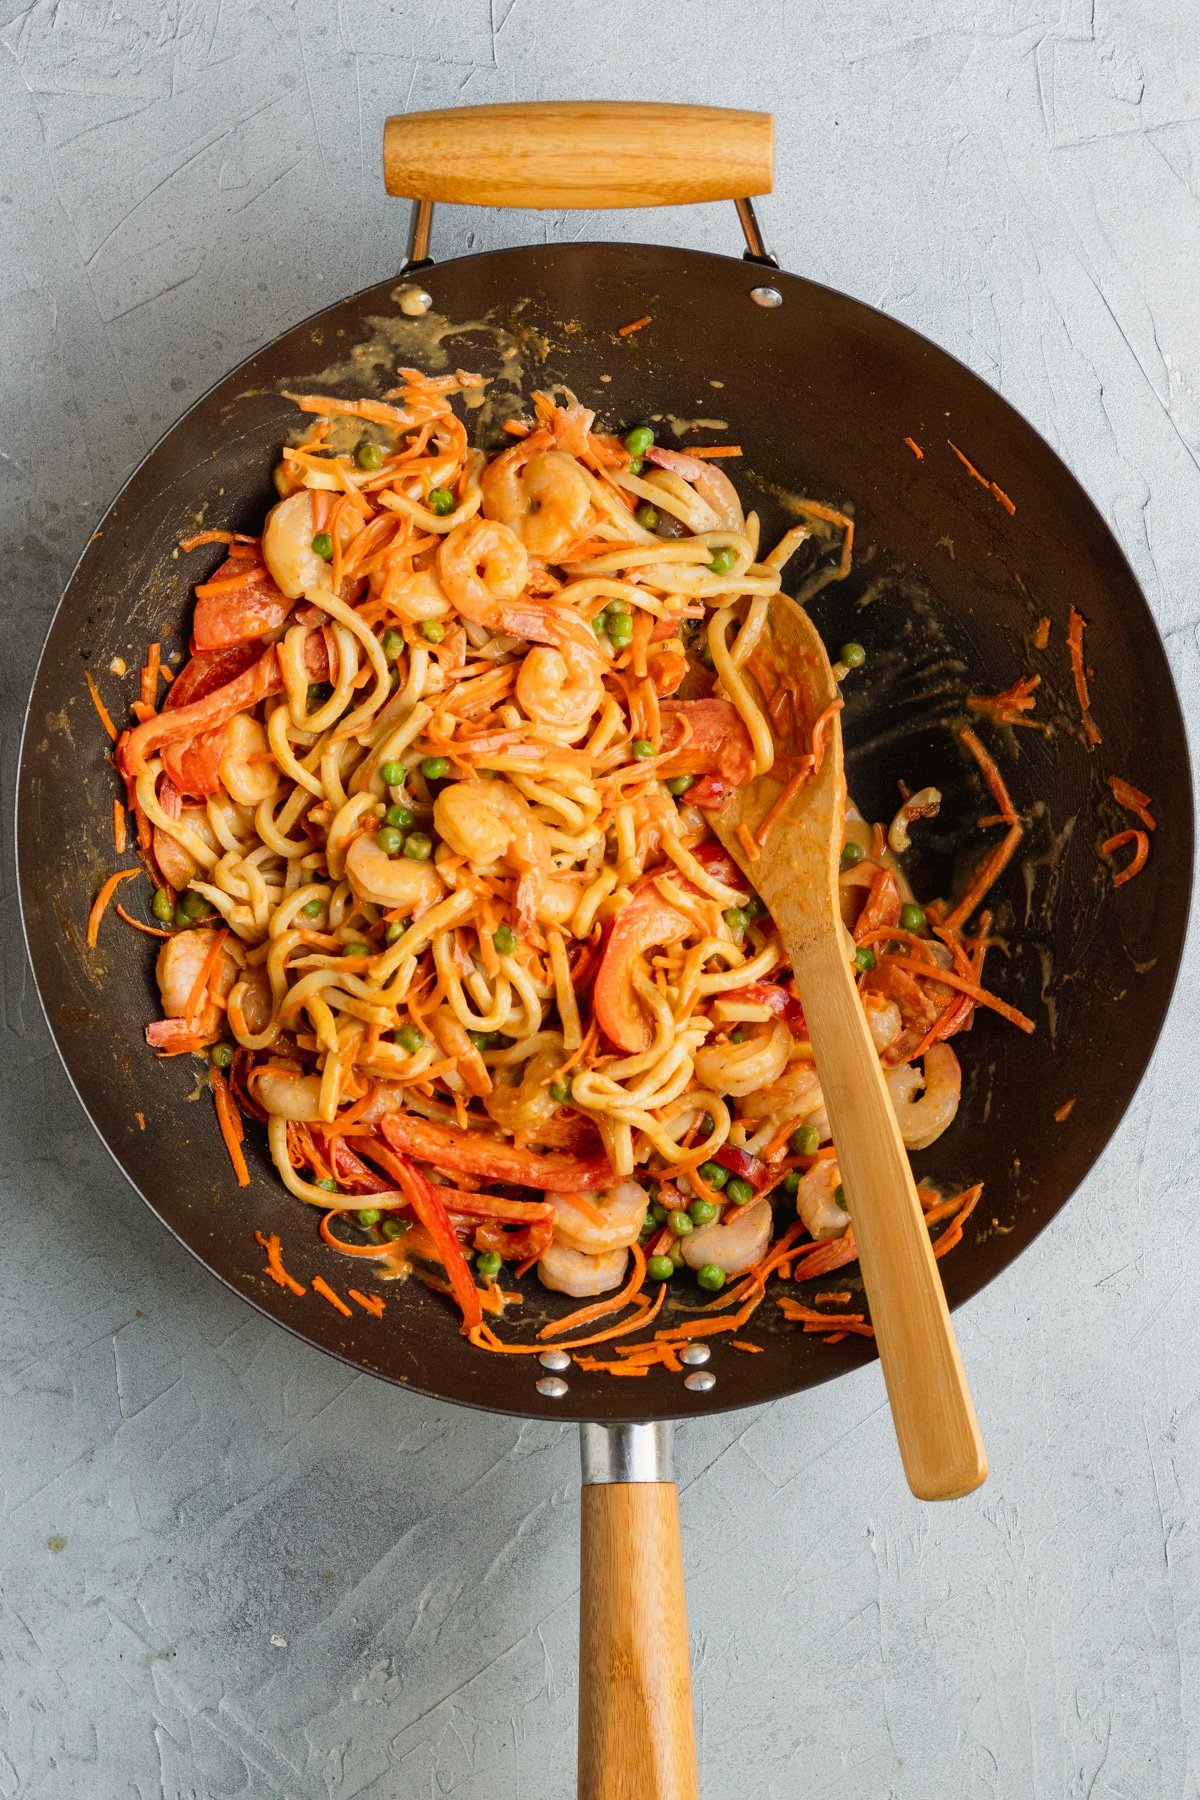 noodles, shrimp and veggies in a wok